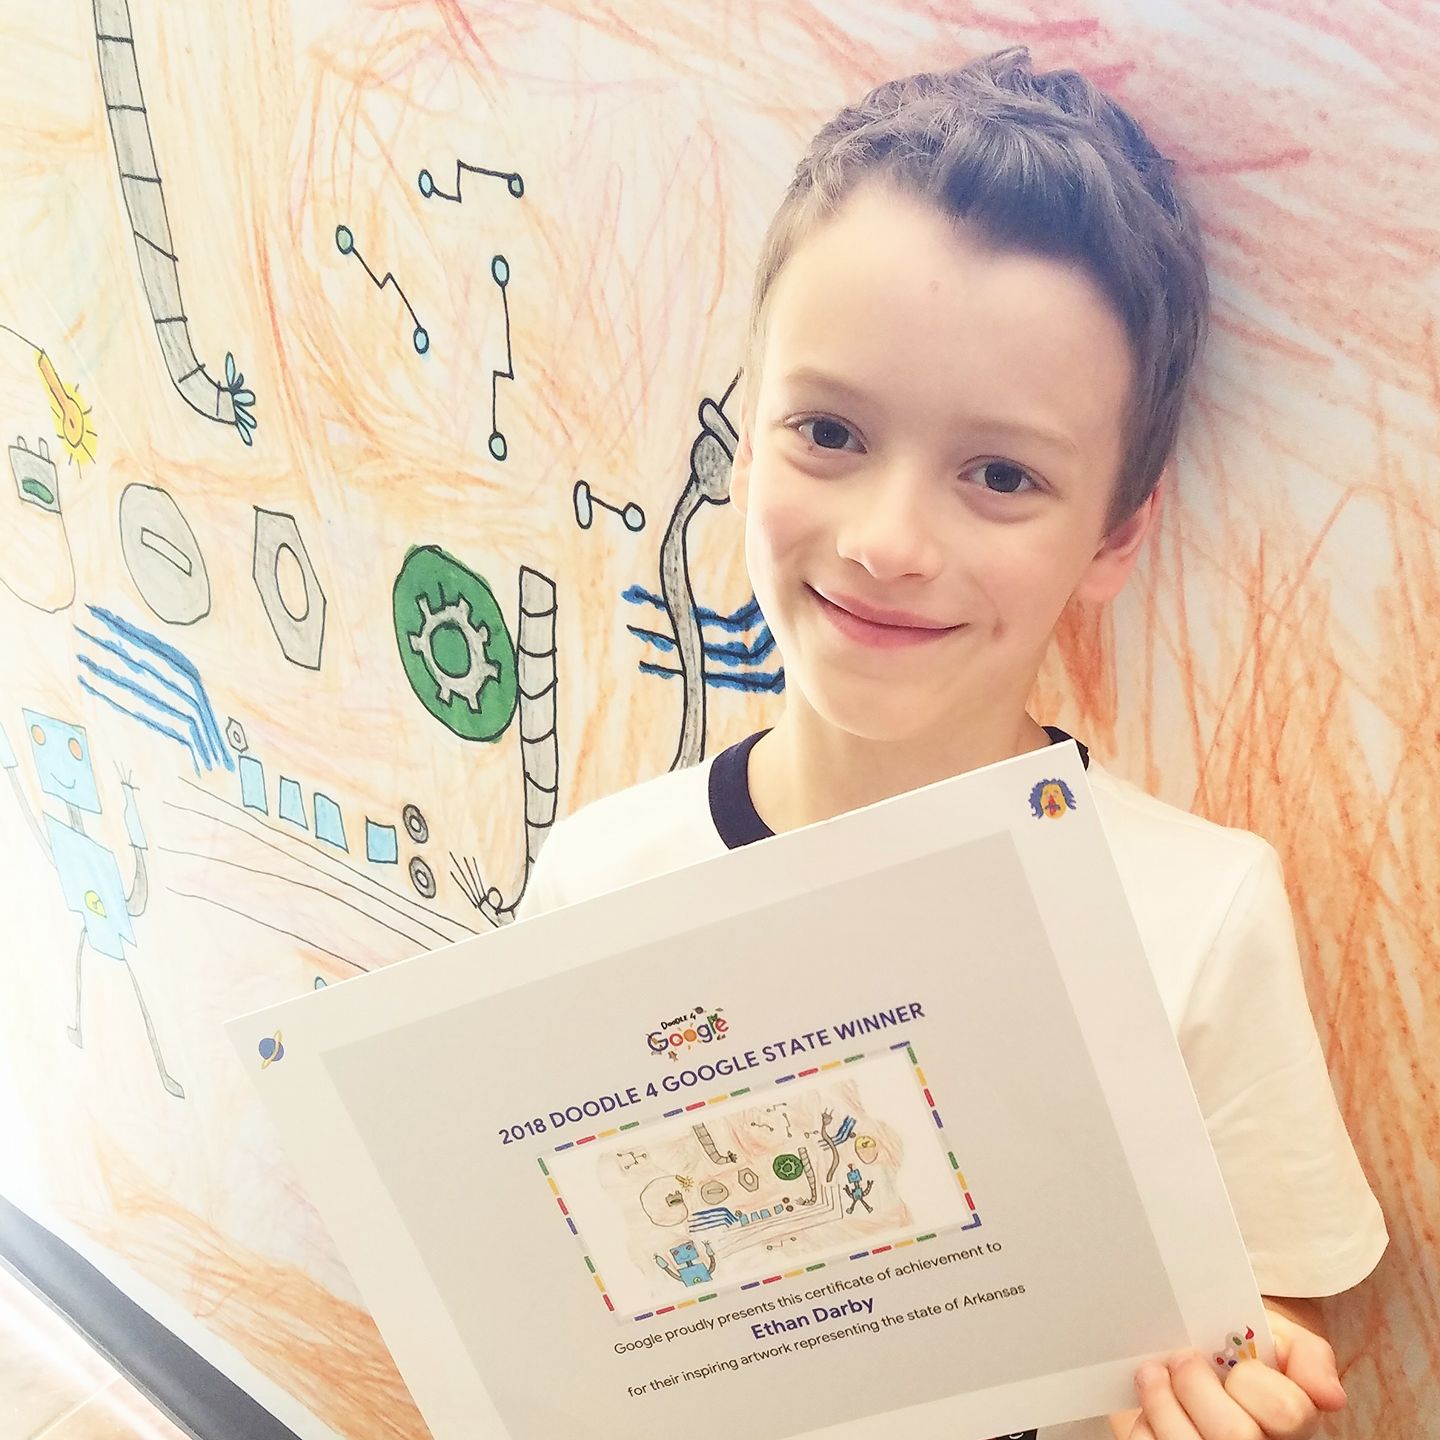 Ethan with his Google Doodle certificate